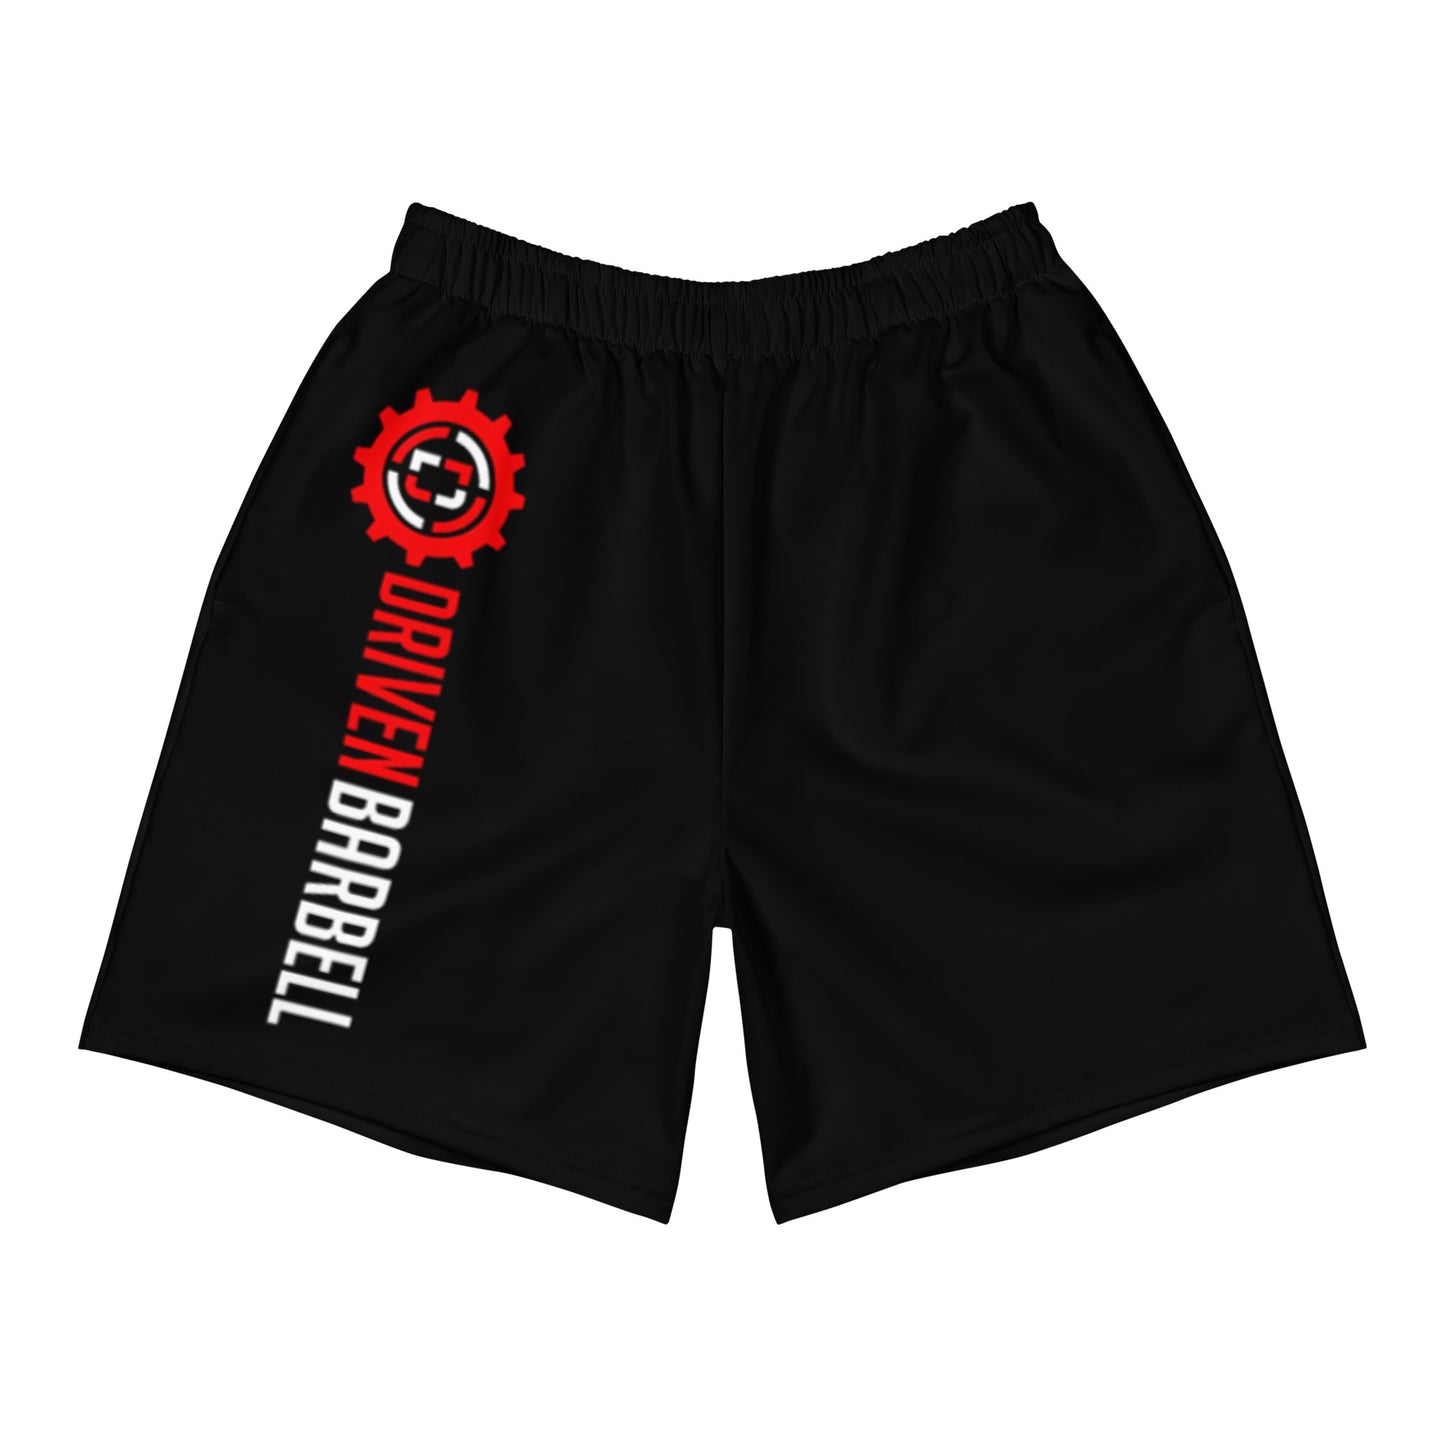 DRIVEN BARBELL Men's Recycled Athletic Shorts